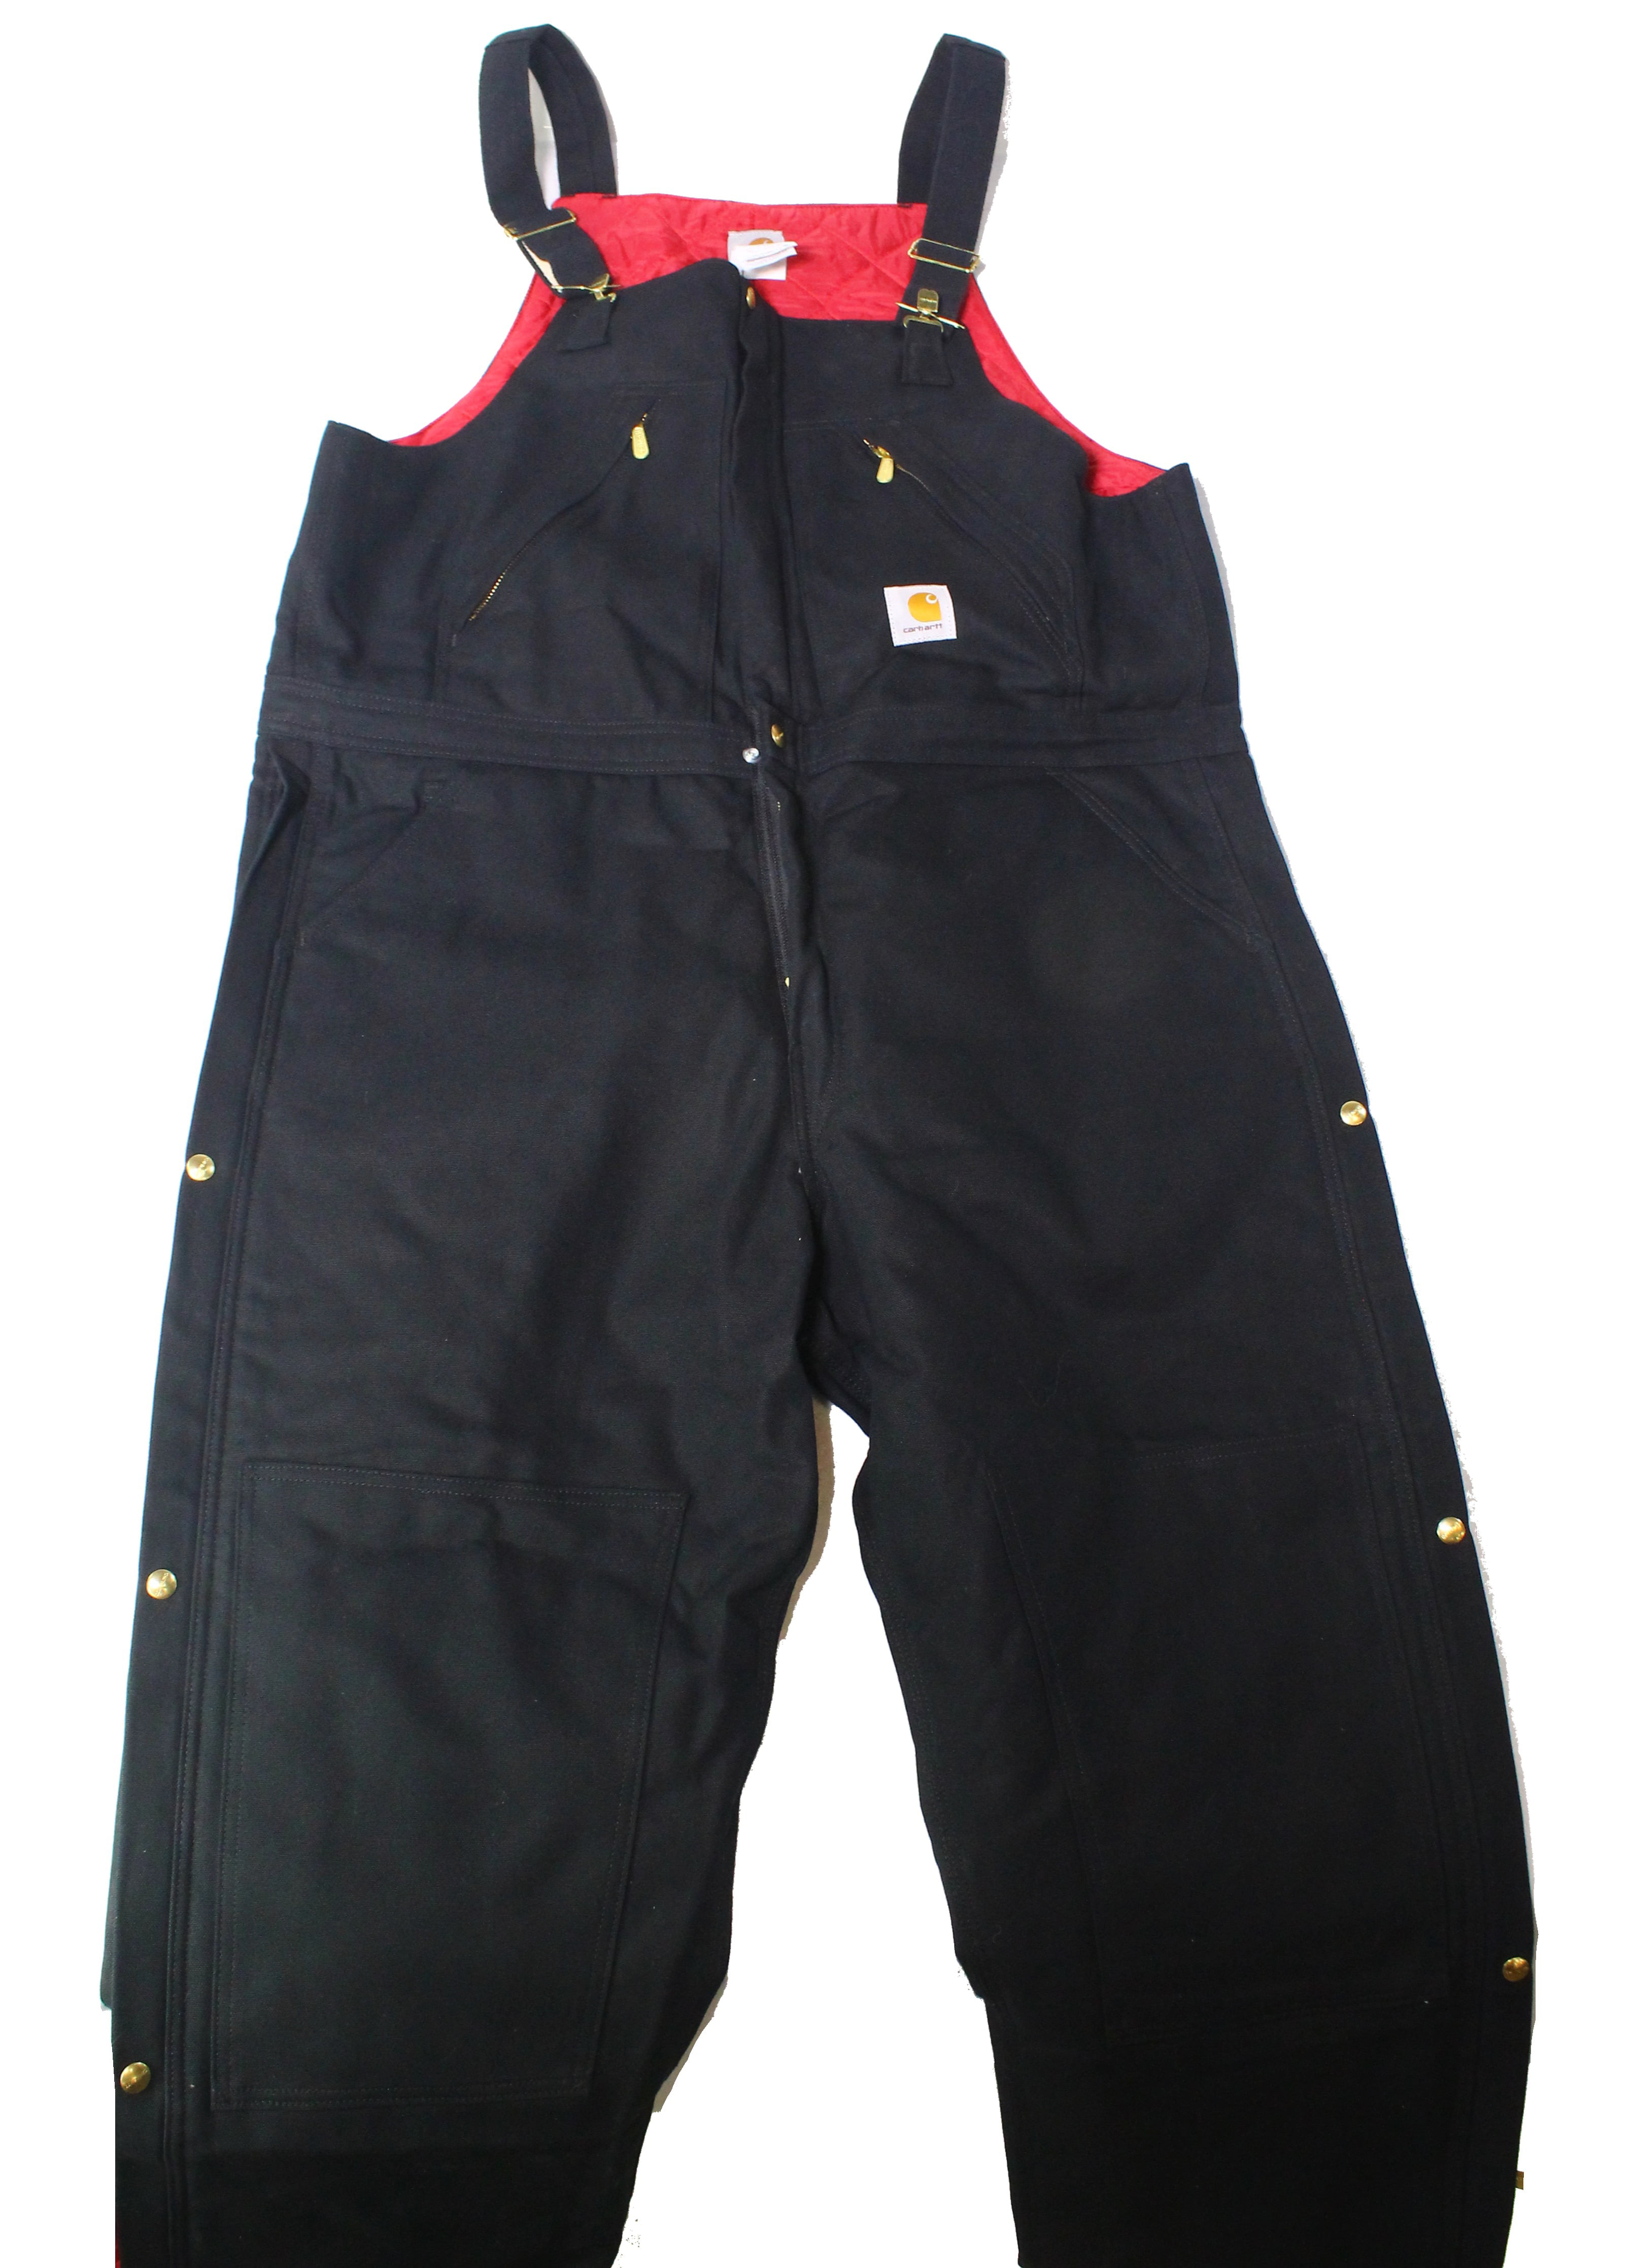 Carhartt Pants - Mens Quilt-Lined Zip-To-Thigh Overalls Pants 42 ...